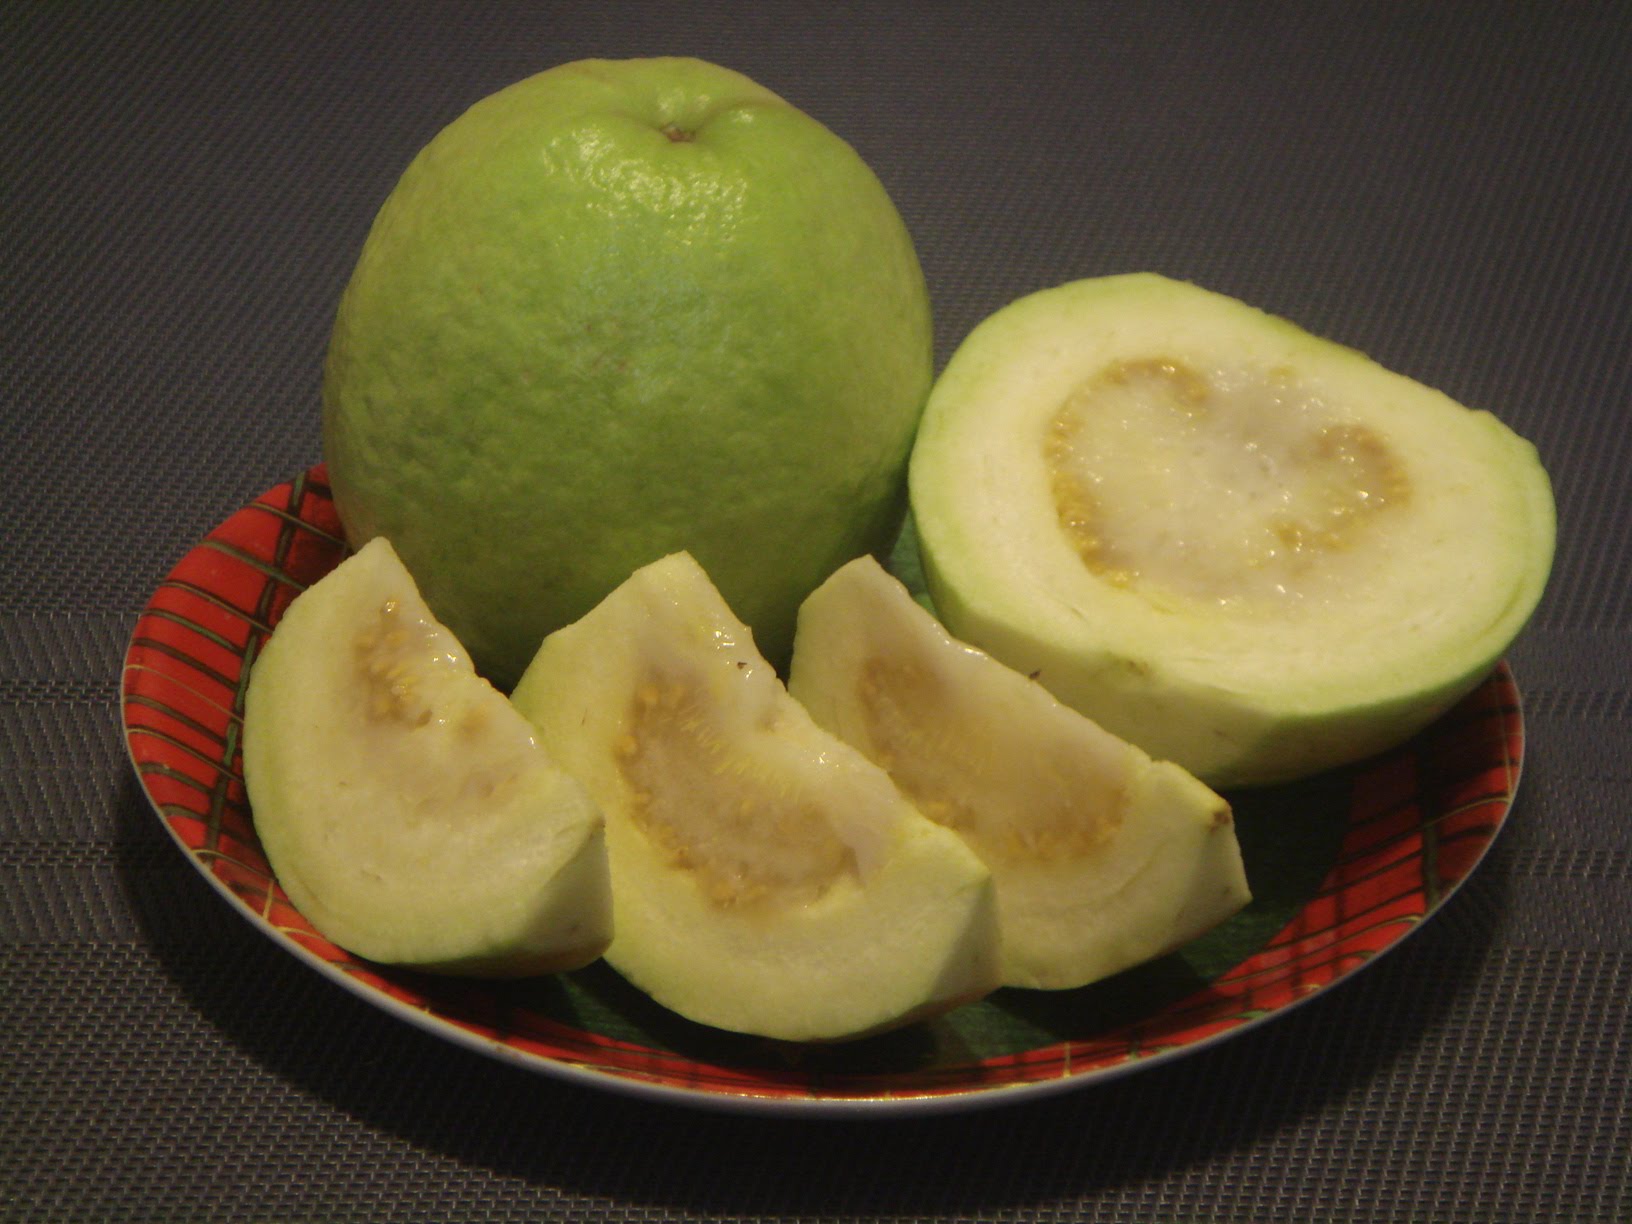 Guava Fruit: How to Eat a Guava - YouTube